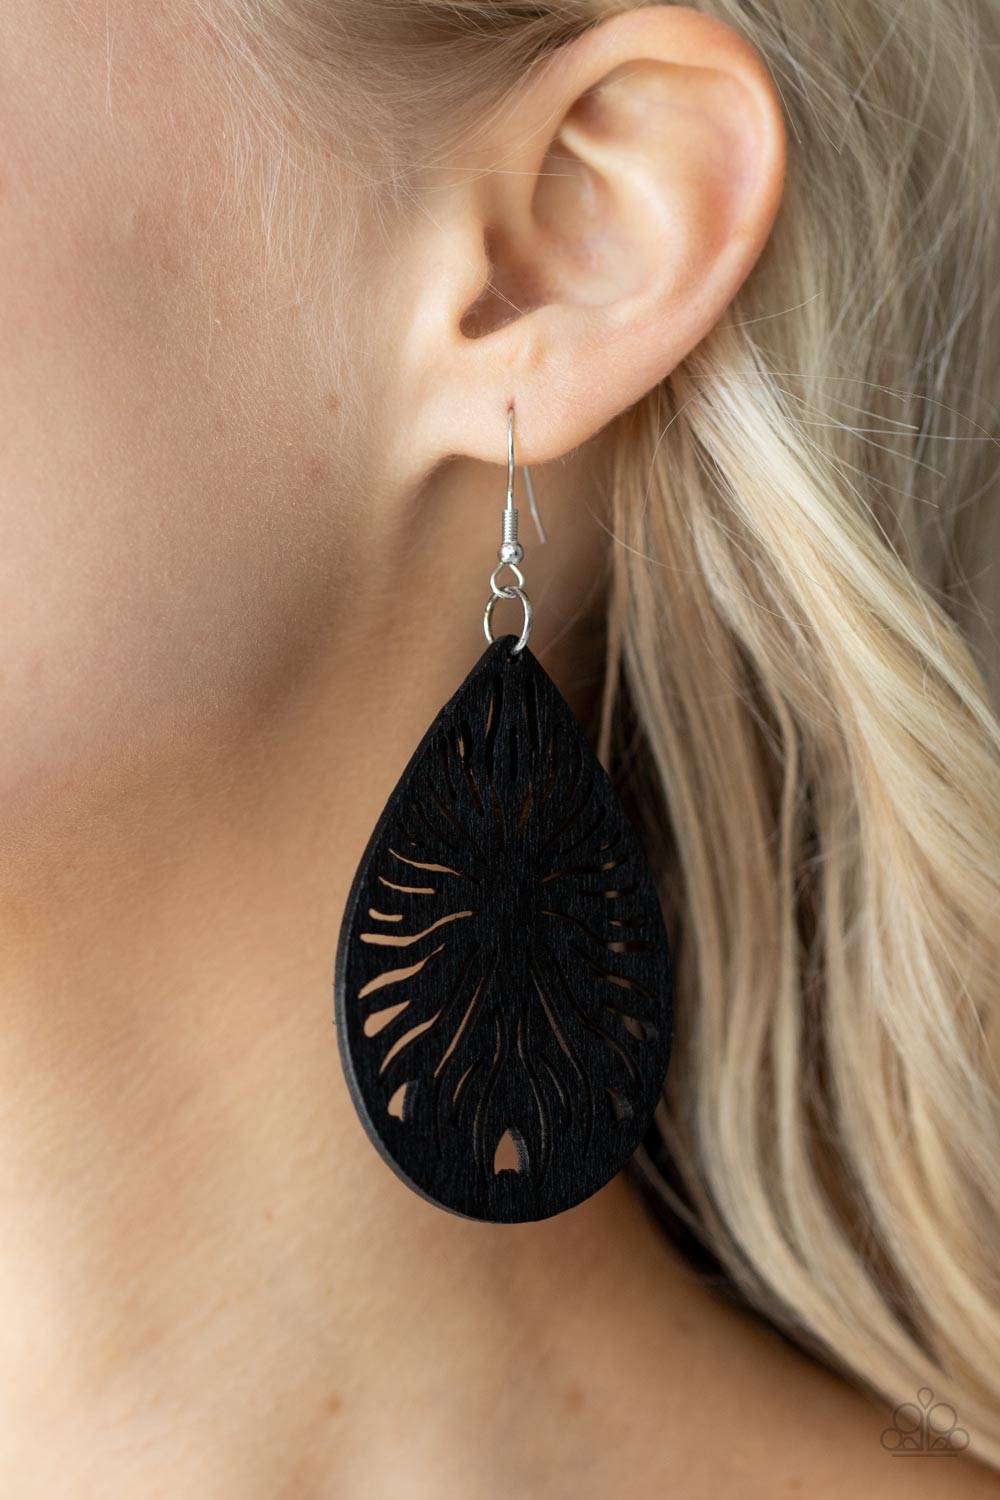 Sunny Incantations Black Wood Earrings - Paparazzi Accessories-on model - CarasShop.com - $5 Jewelry by Cara Jewels